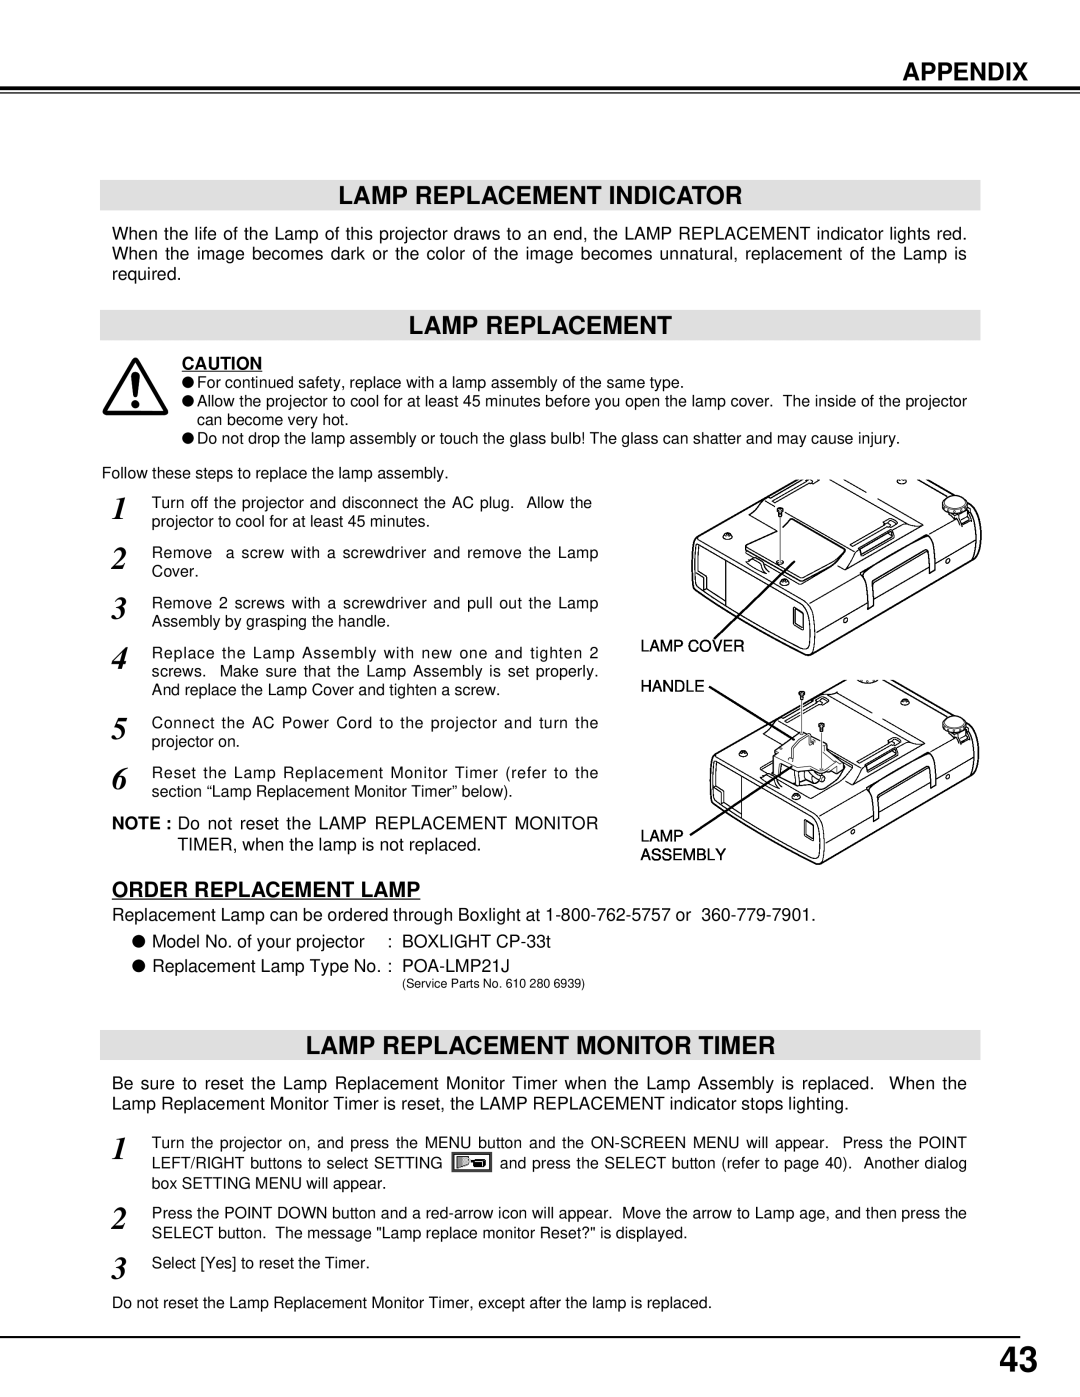 BOXLIGHT CP-33t manual Appendix Lamp Replacement Indicator, Lamp Replacement Monitor Timer, Order Replacement Lamp 